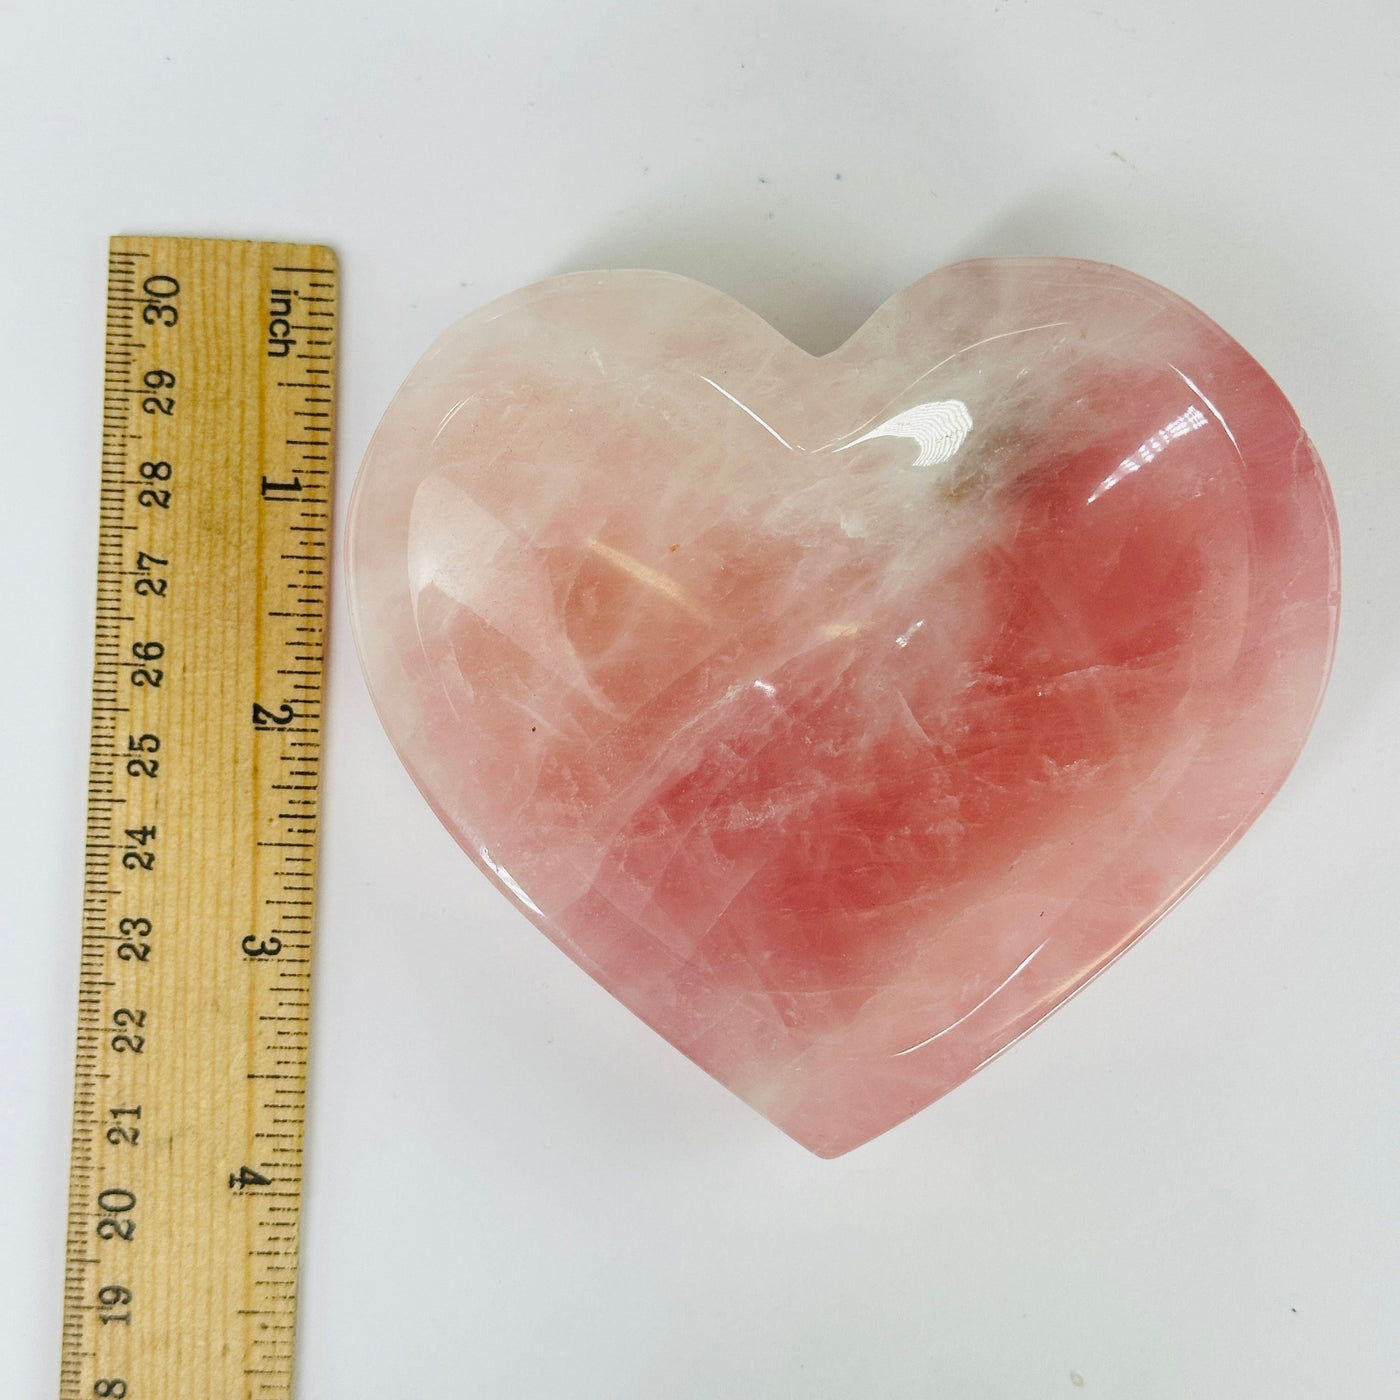 rose quartz heart bowl next to a ruler for size reference